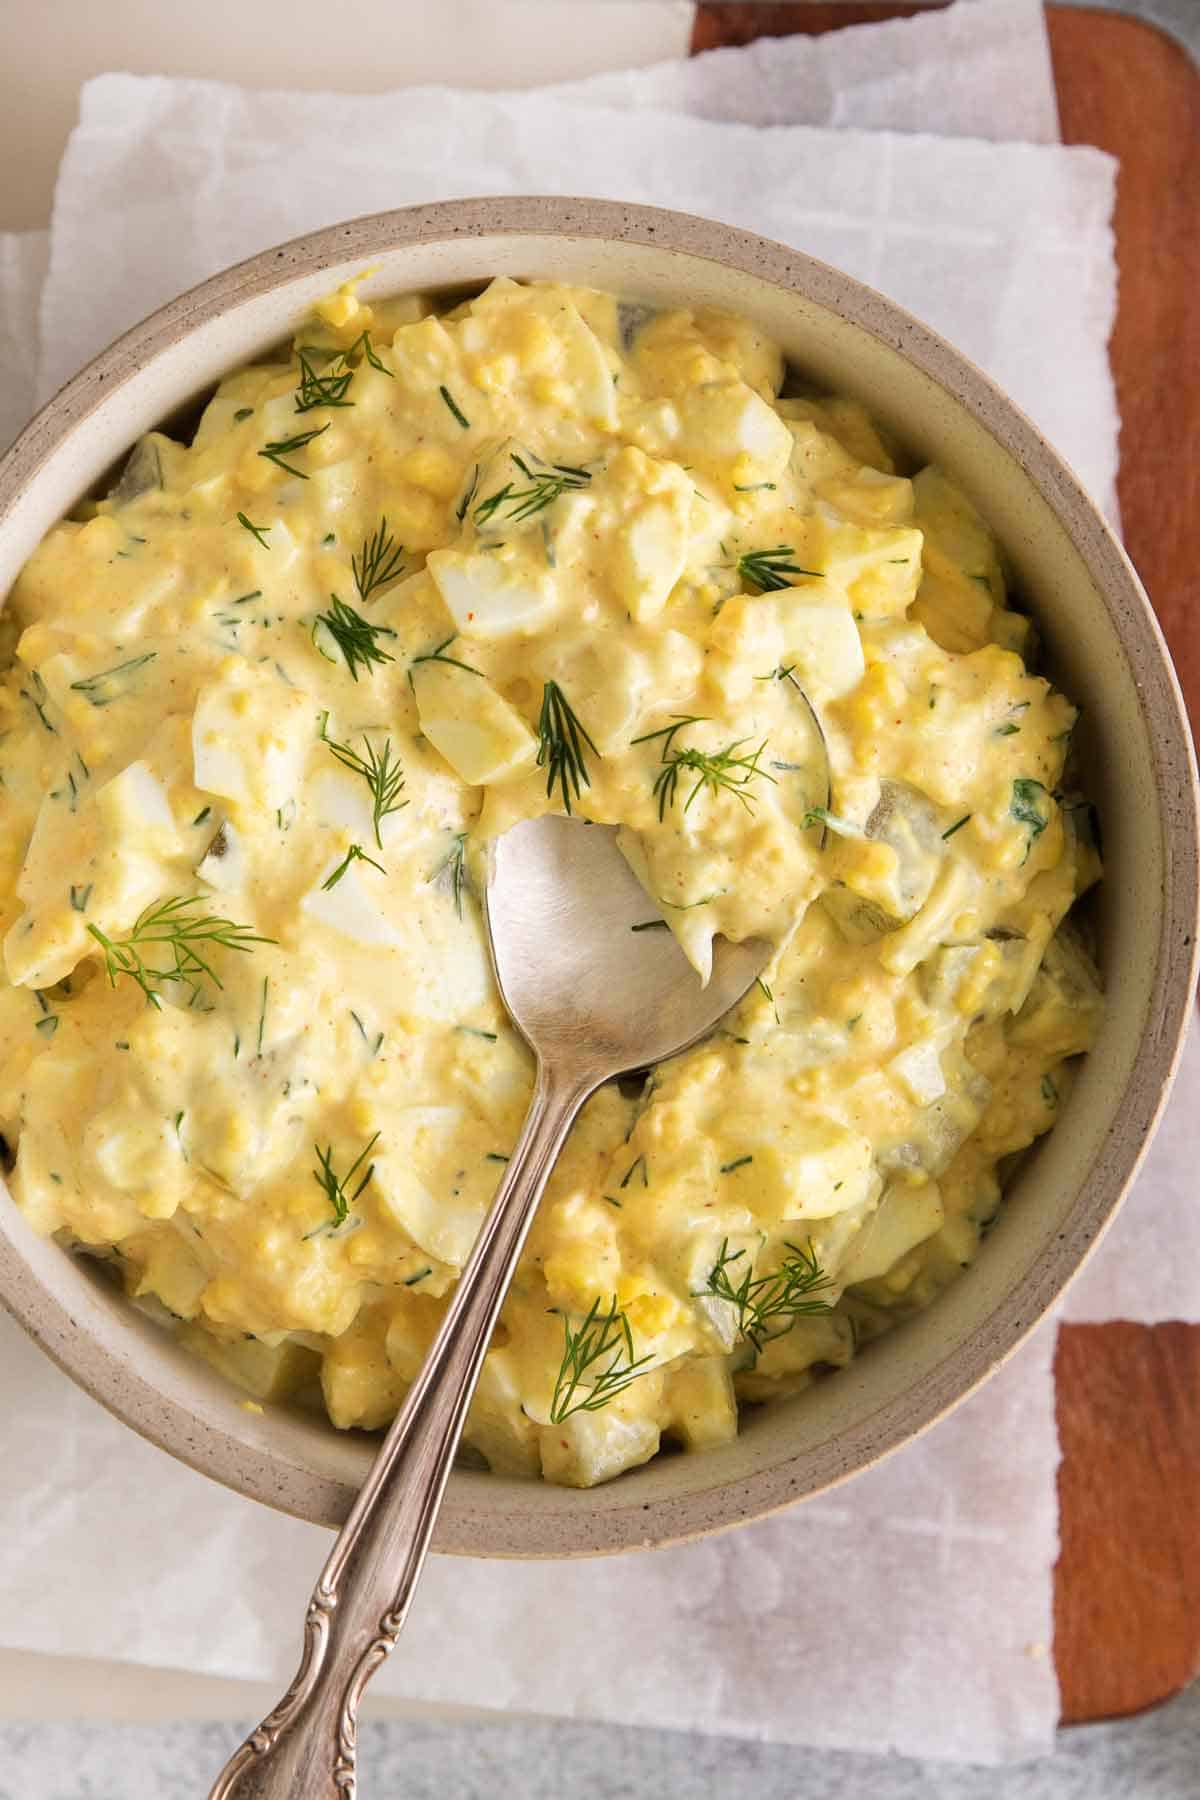 The best egg salad recipe made with dill pickles